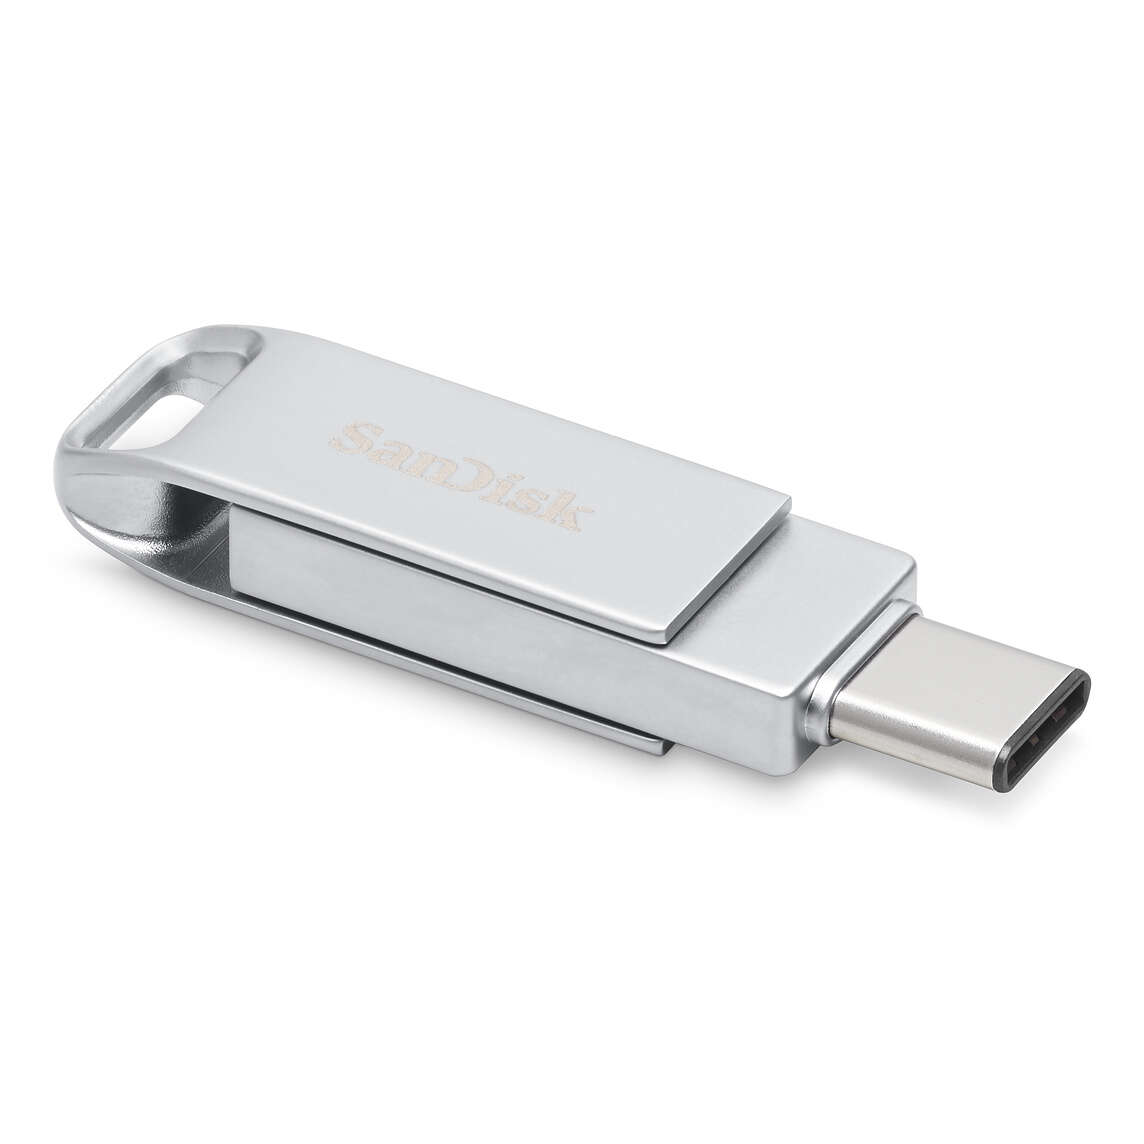 test Sandisk Ultra Dual Drive Luxe USB Type-C 128 GB, recenzja Sandisk Ultra Dual Drive Luxe USB Type-C 128 GB, review Sandisk Ultra Dual Drive Luxe USB Type-C 128 GB, opinia Sandisk Ultra Dual Drive Luxe USB Type-C 128 GB